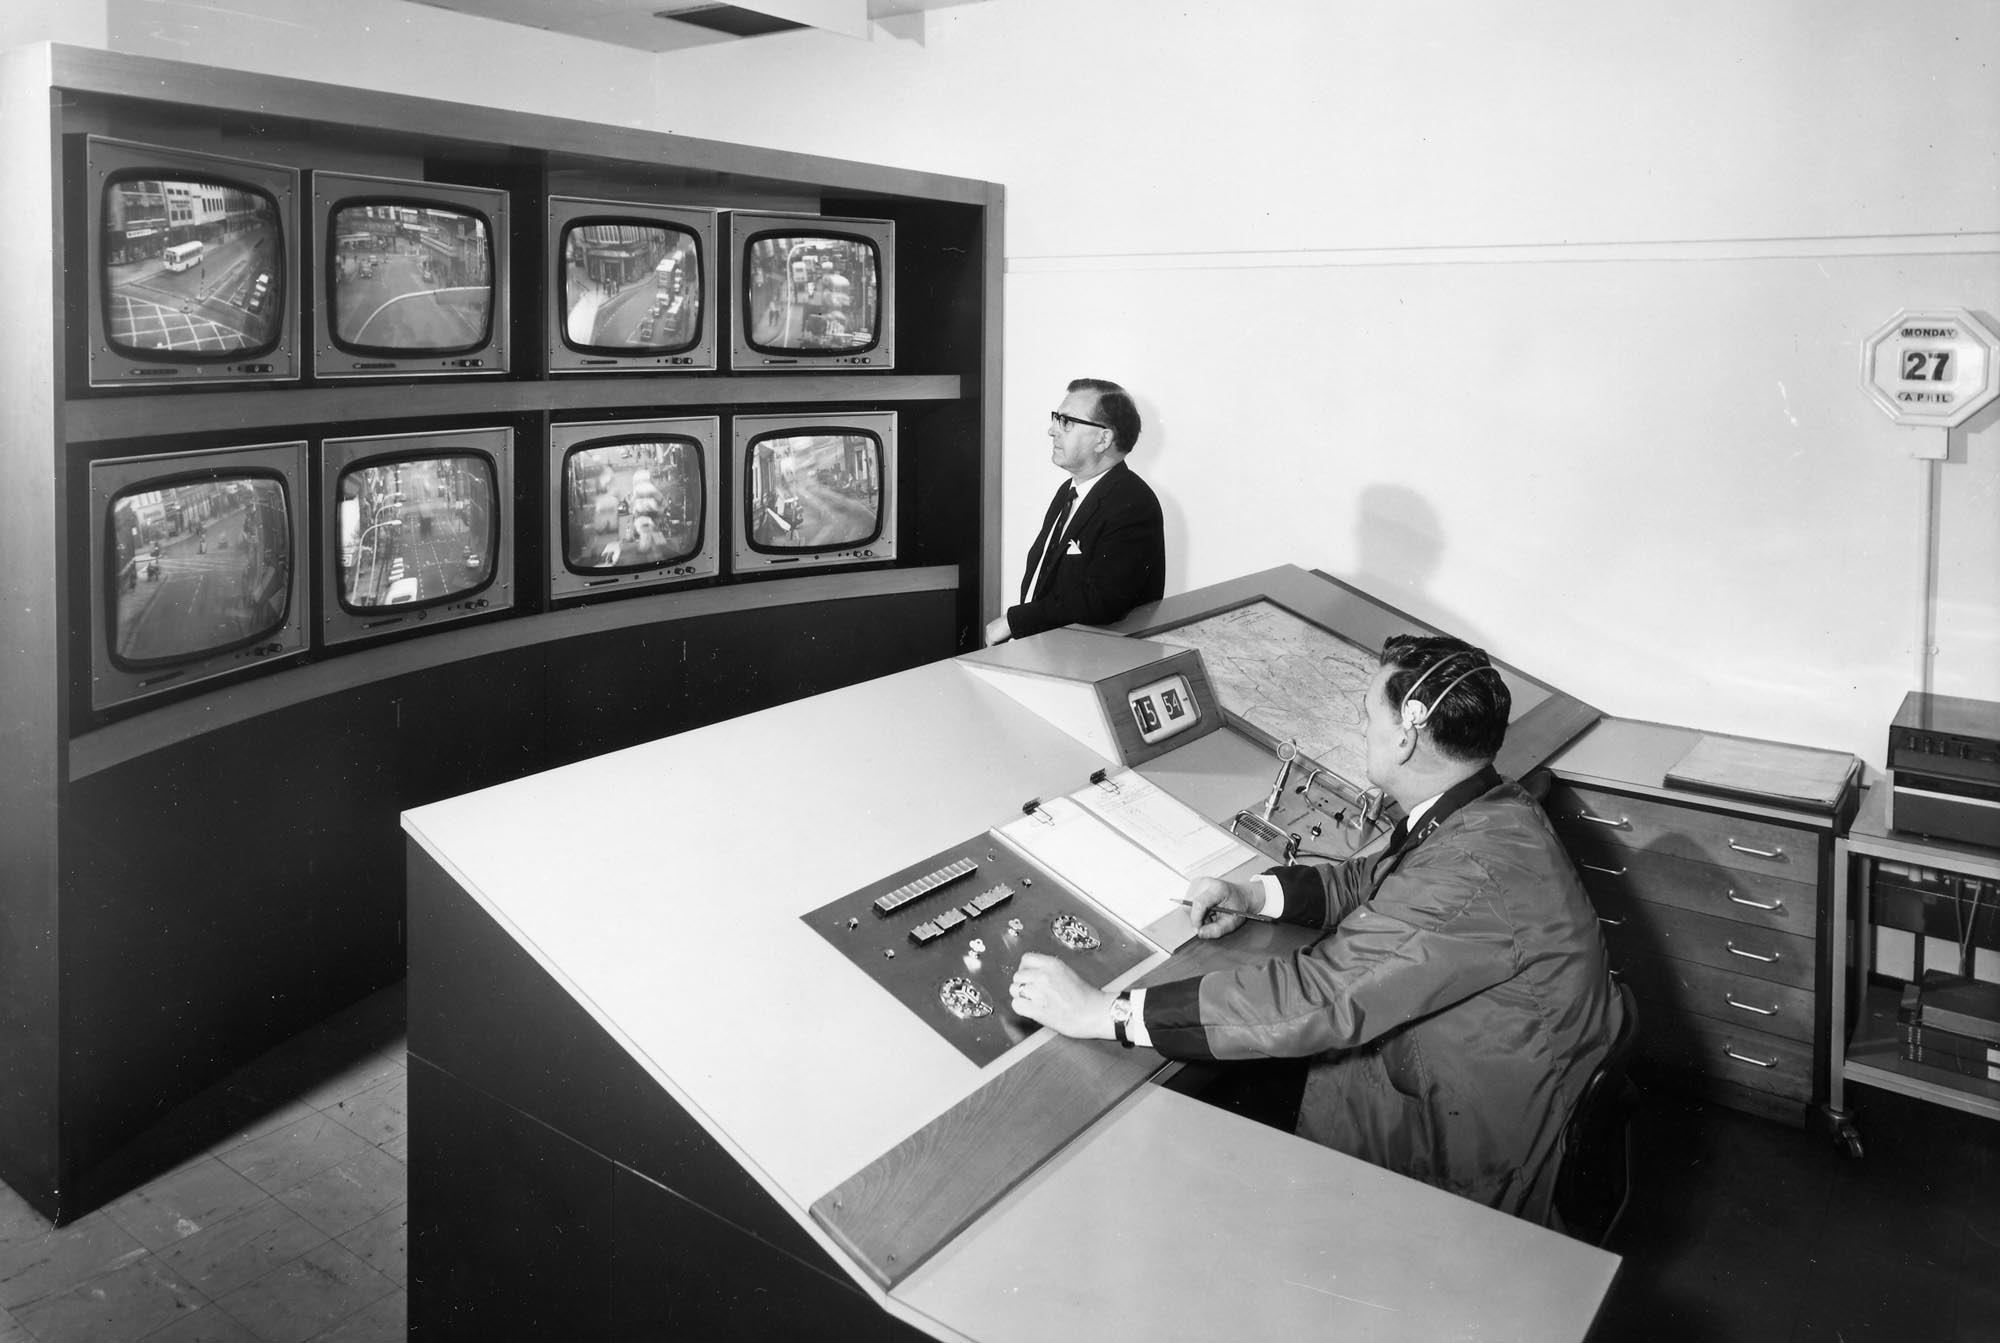 The control room with a bank of CCTV monitors - Leicester Transport Heritage Trust, Rob Haywood and Keith Wood